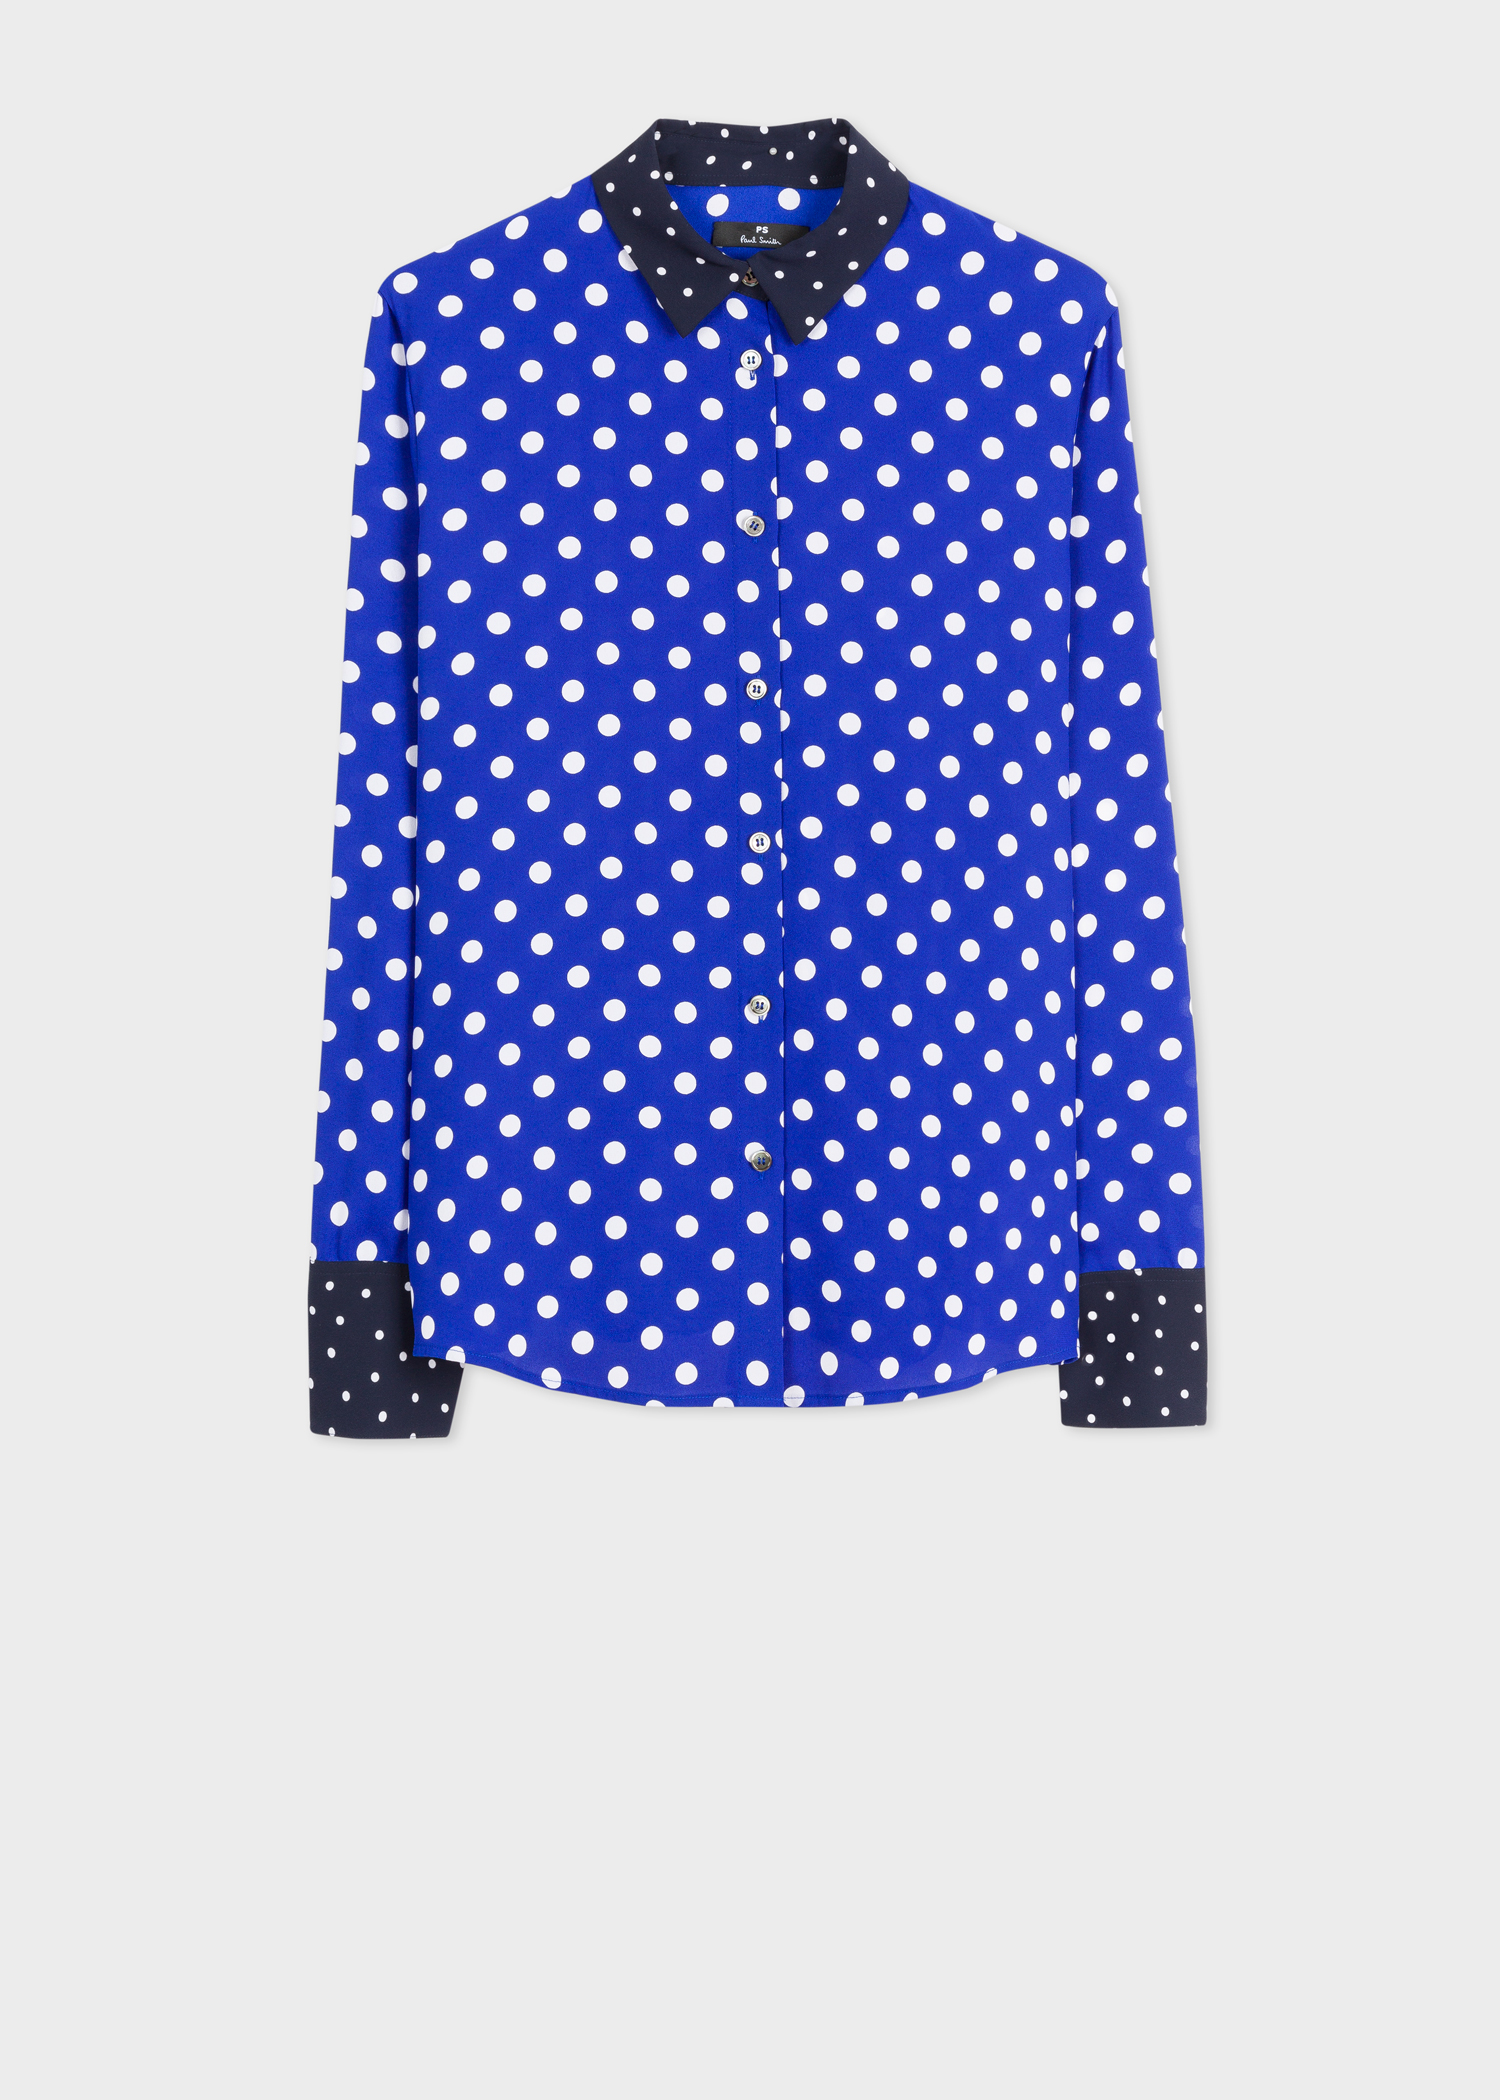 Women's Blue And White Polka Dot Shirt With Contrast Details - Paul ...